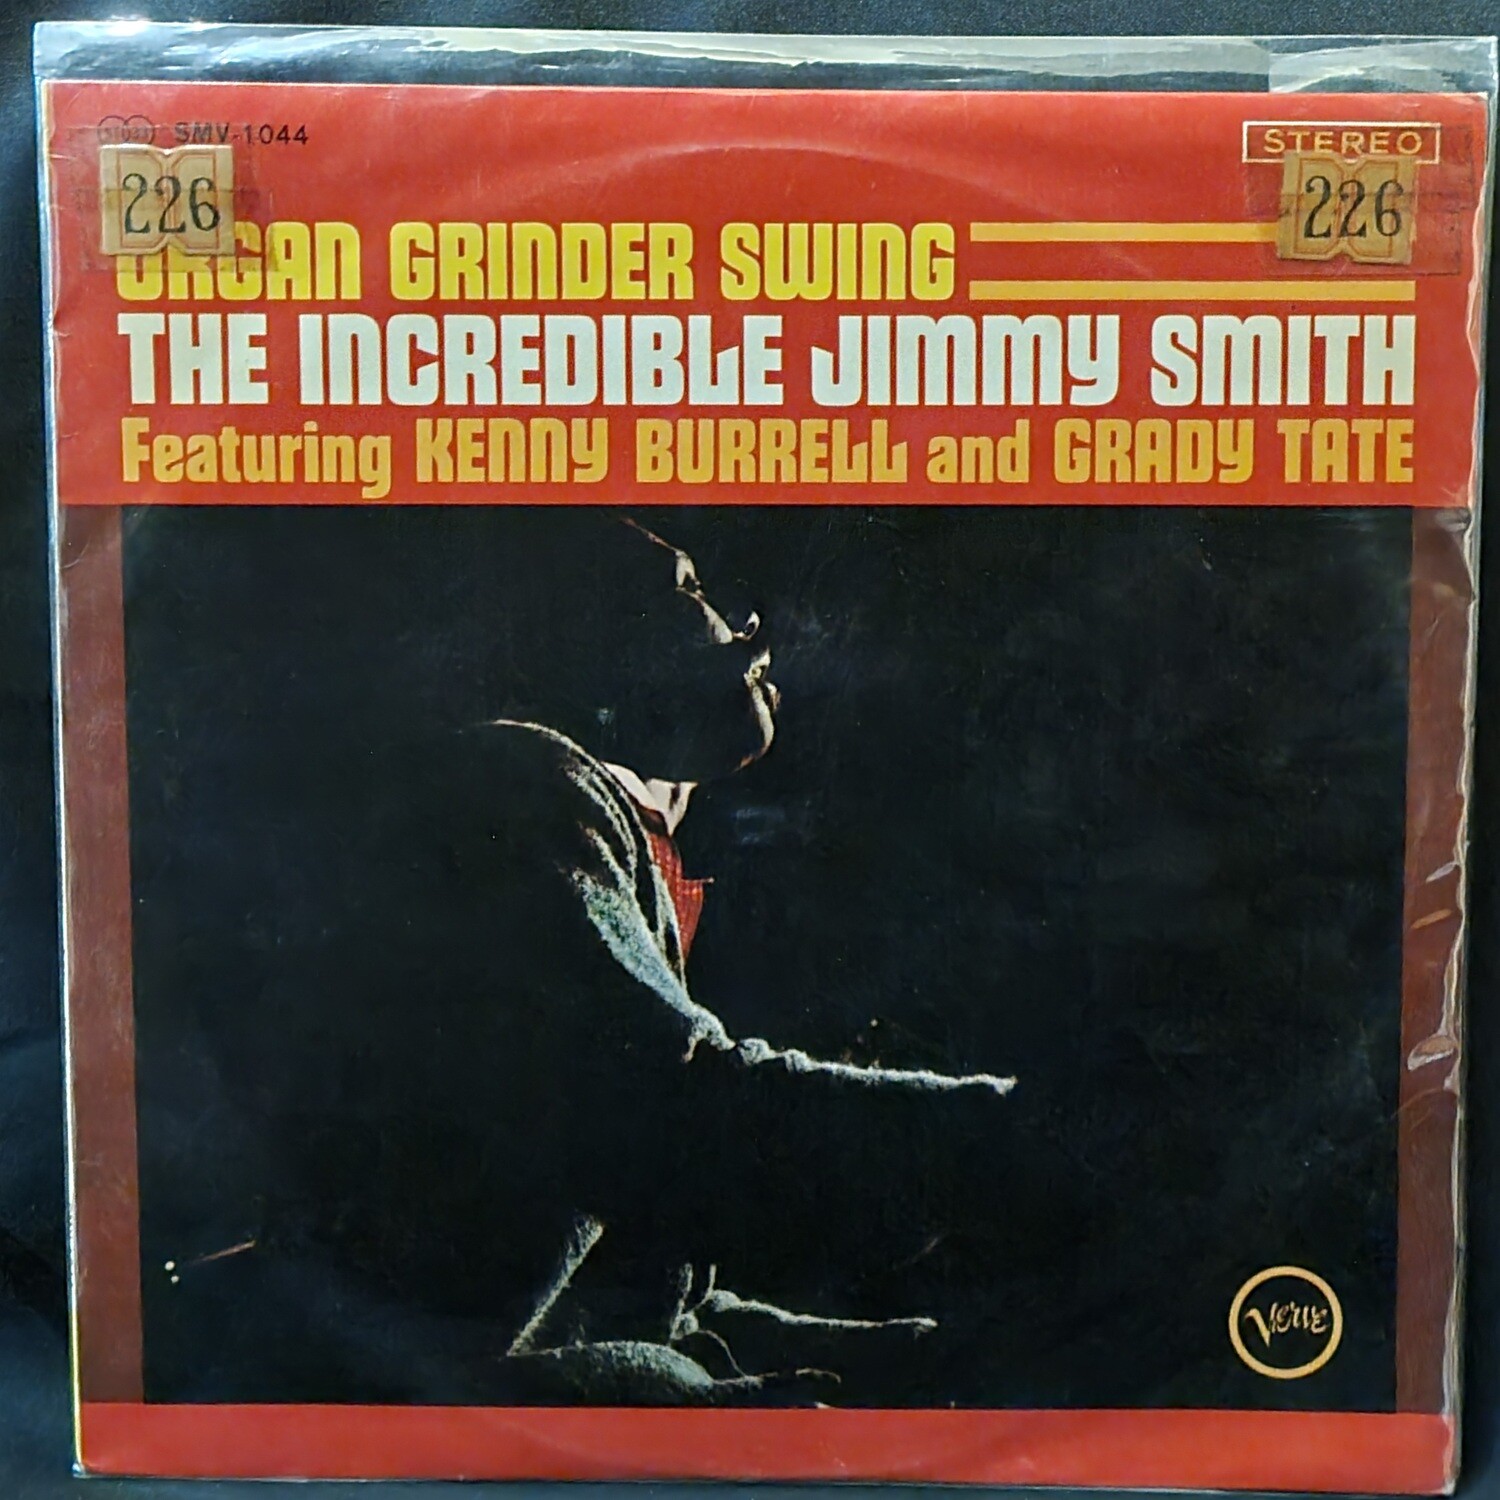 The Incredible Jimmy Smith- Organ Grinder Swing